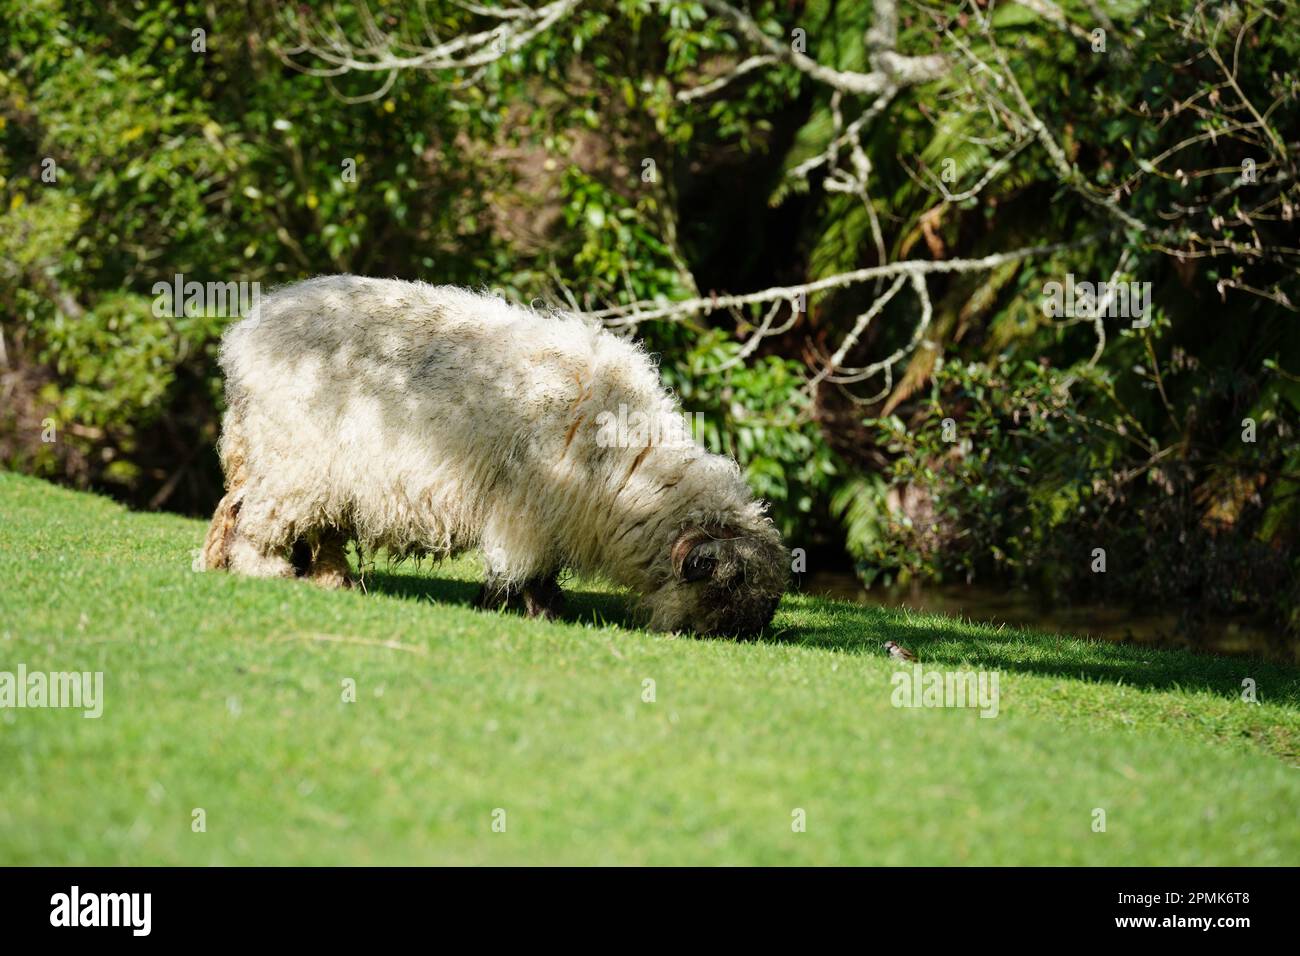 Valais Blacknose sheep, a docile and friendly mountain breed Stock Photo